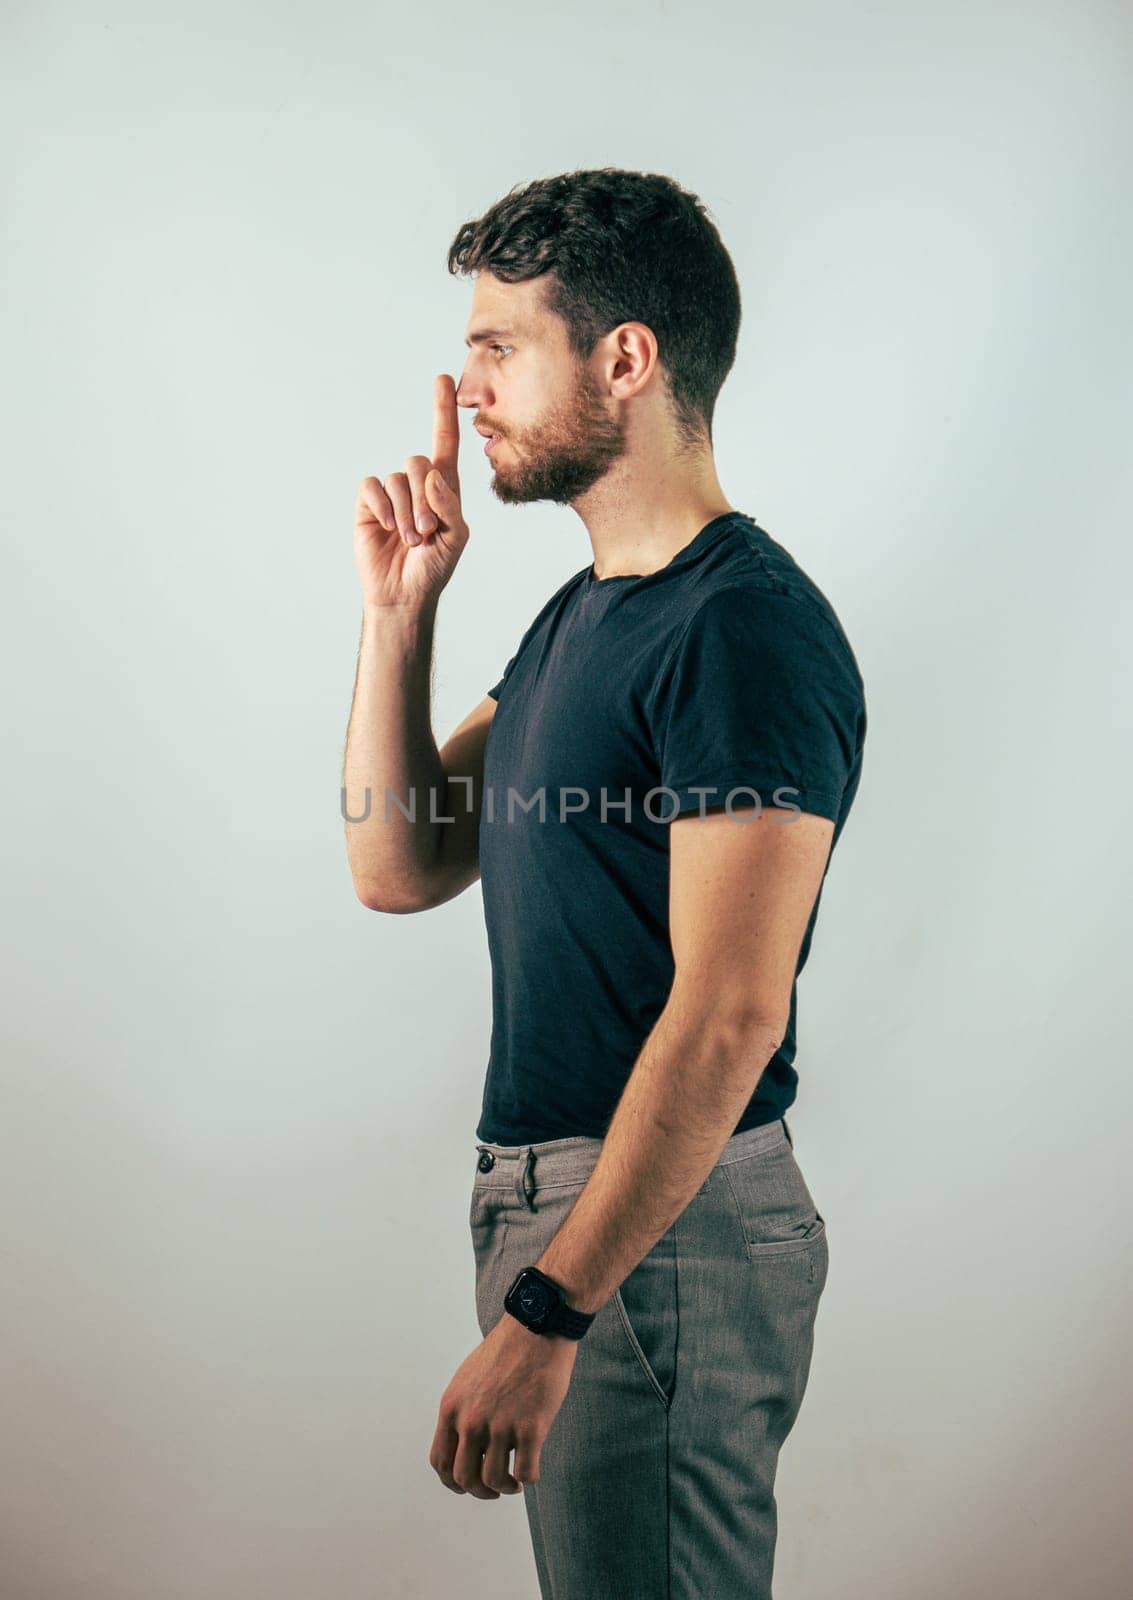 Hush. Young handsome man silencing you, saying shut up, in studio shot. Young man doing hush sign with finger over his mouth, looking at camera, silencing